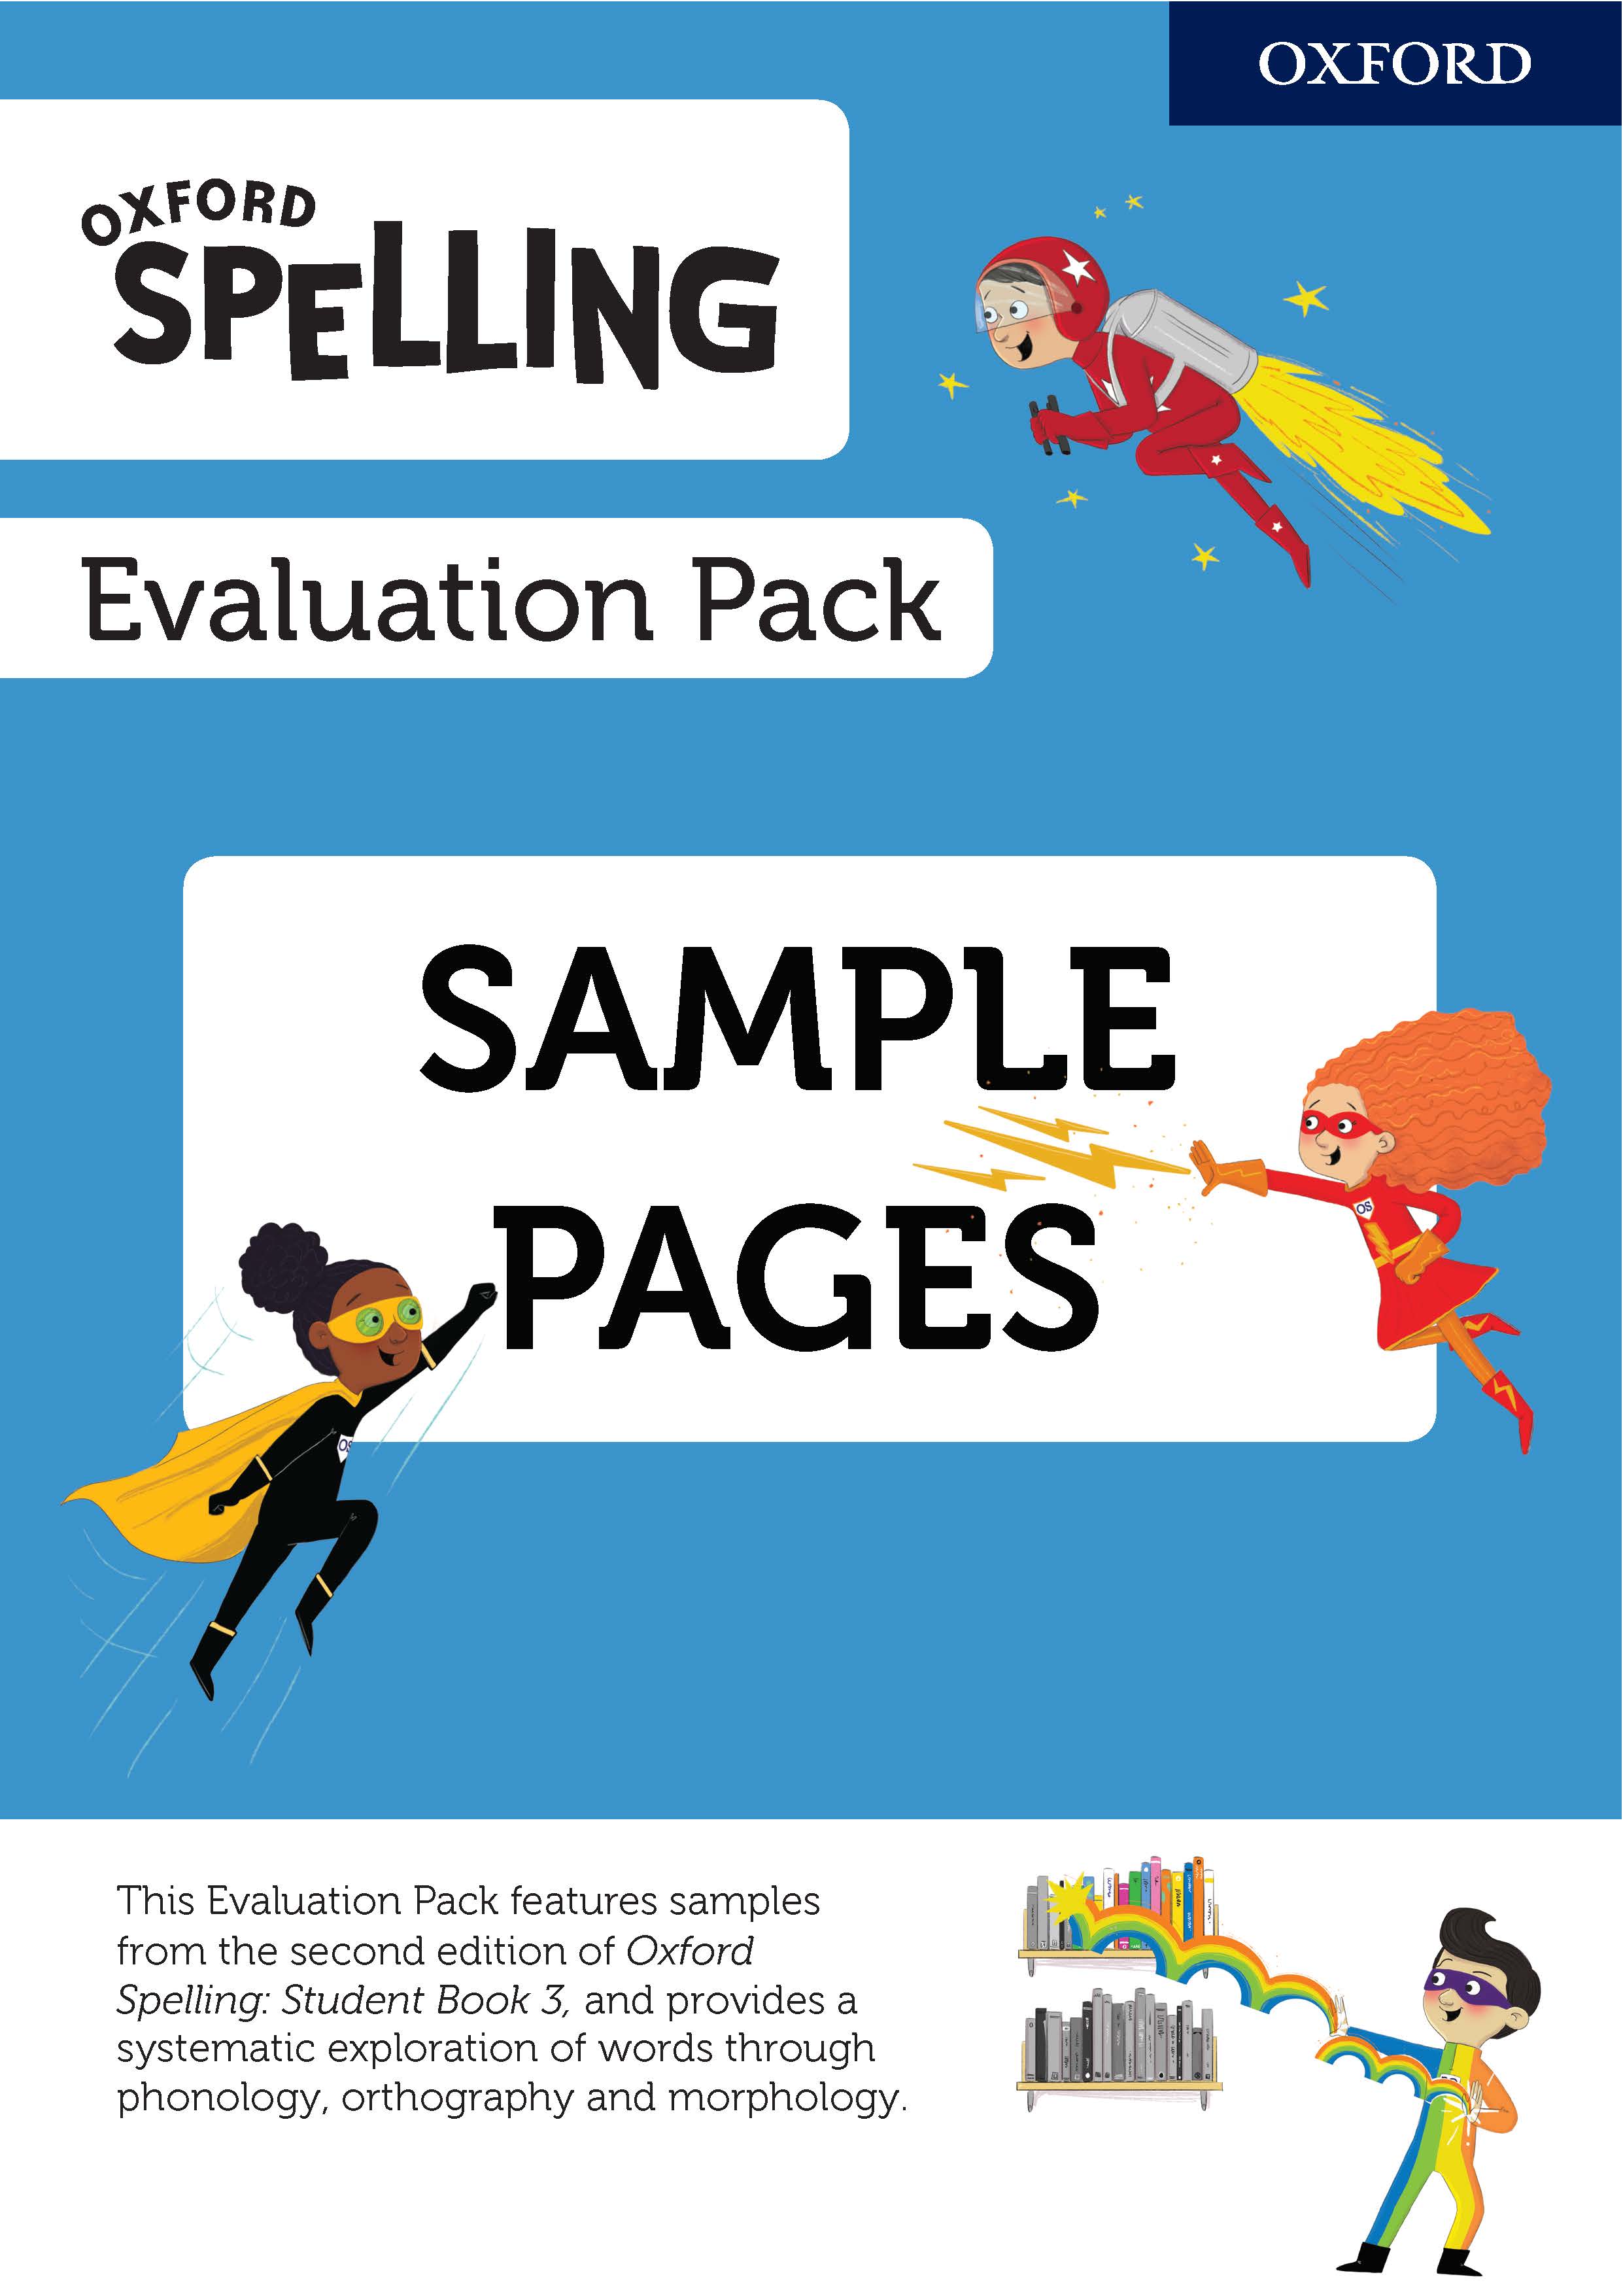 Oxford Spelling Evaluation Pack